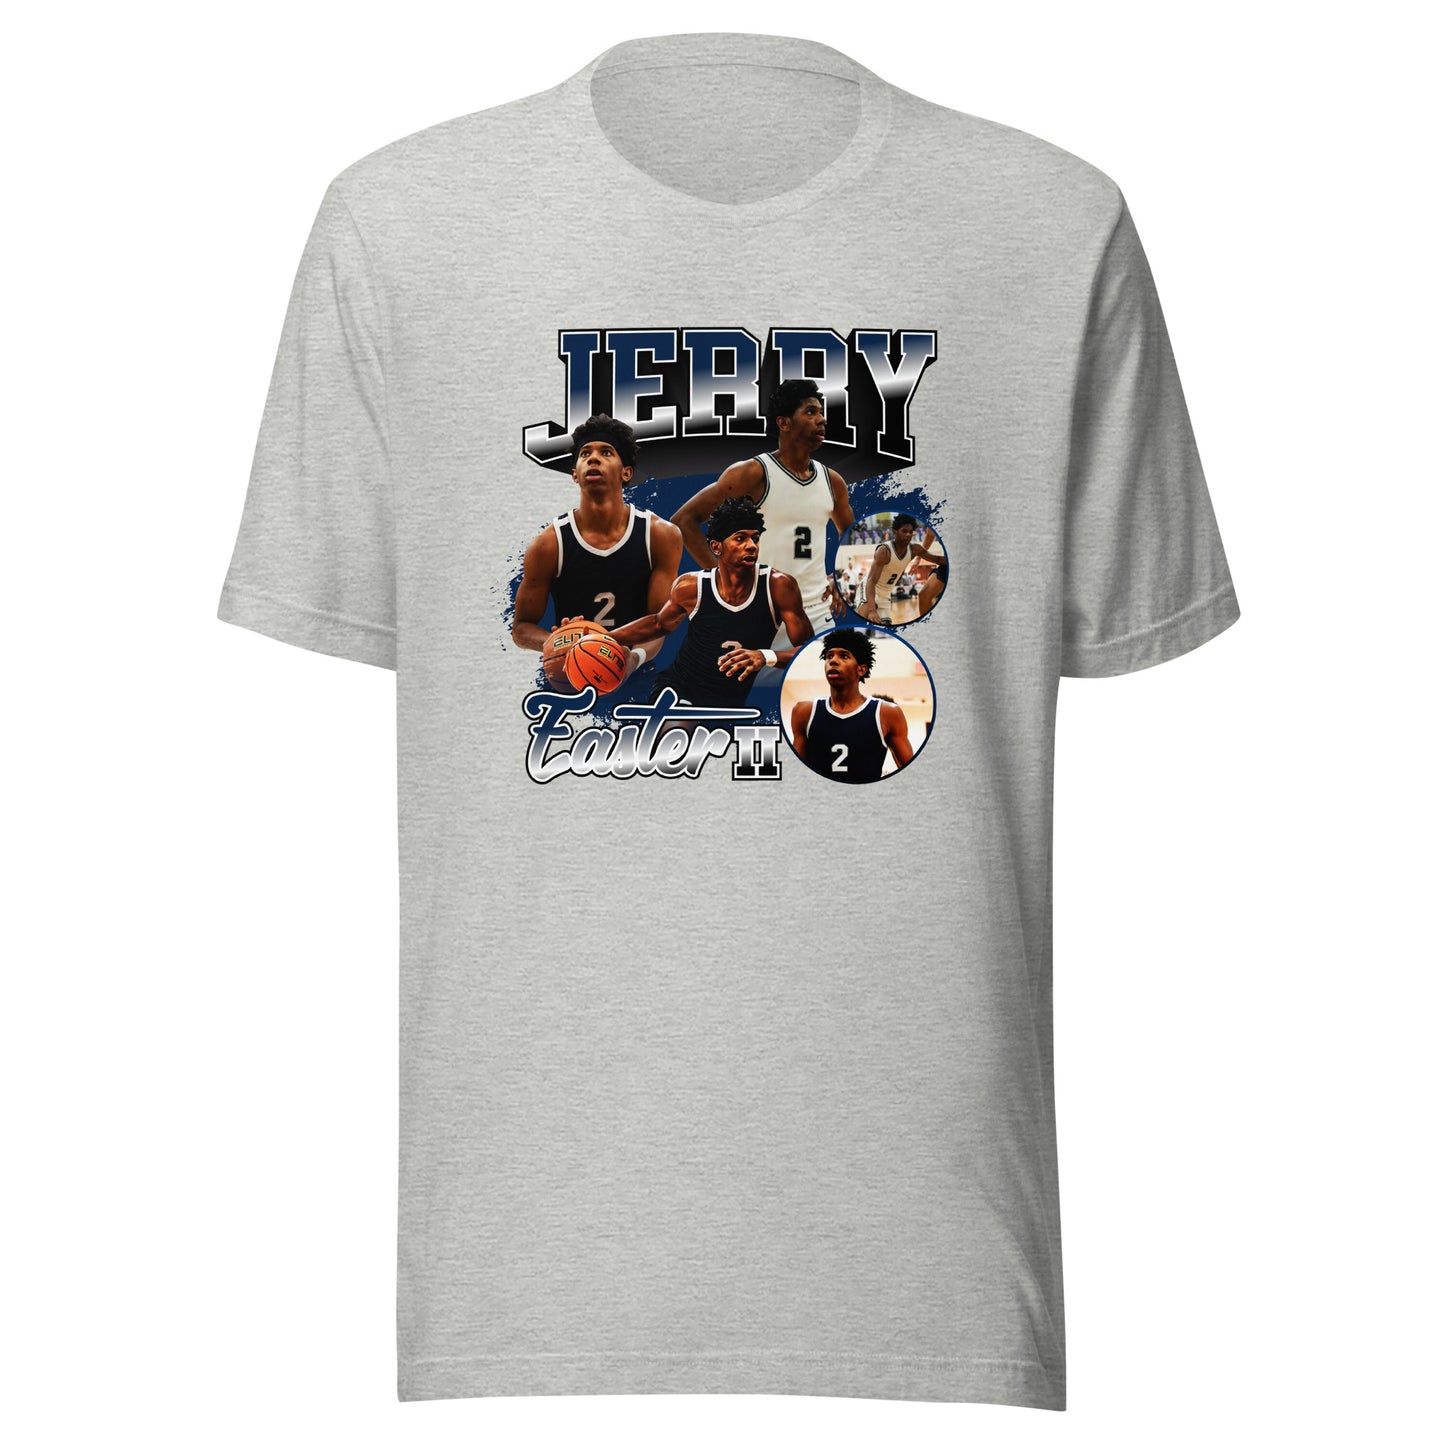 Jerry Easter "Vintage" t-shirt - Fan Arch